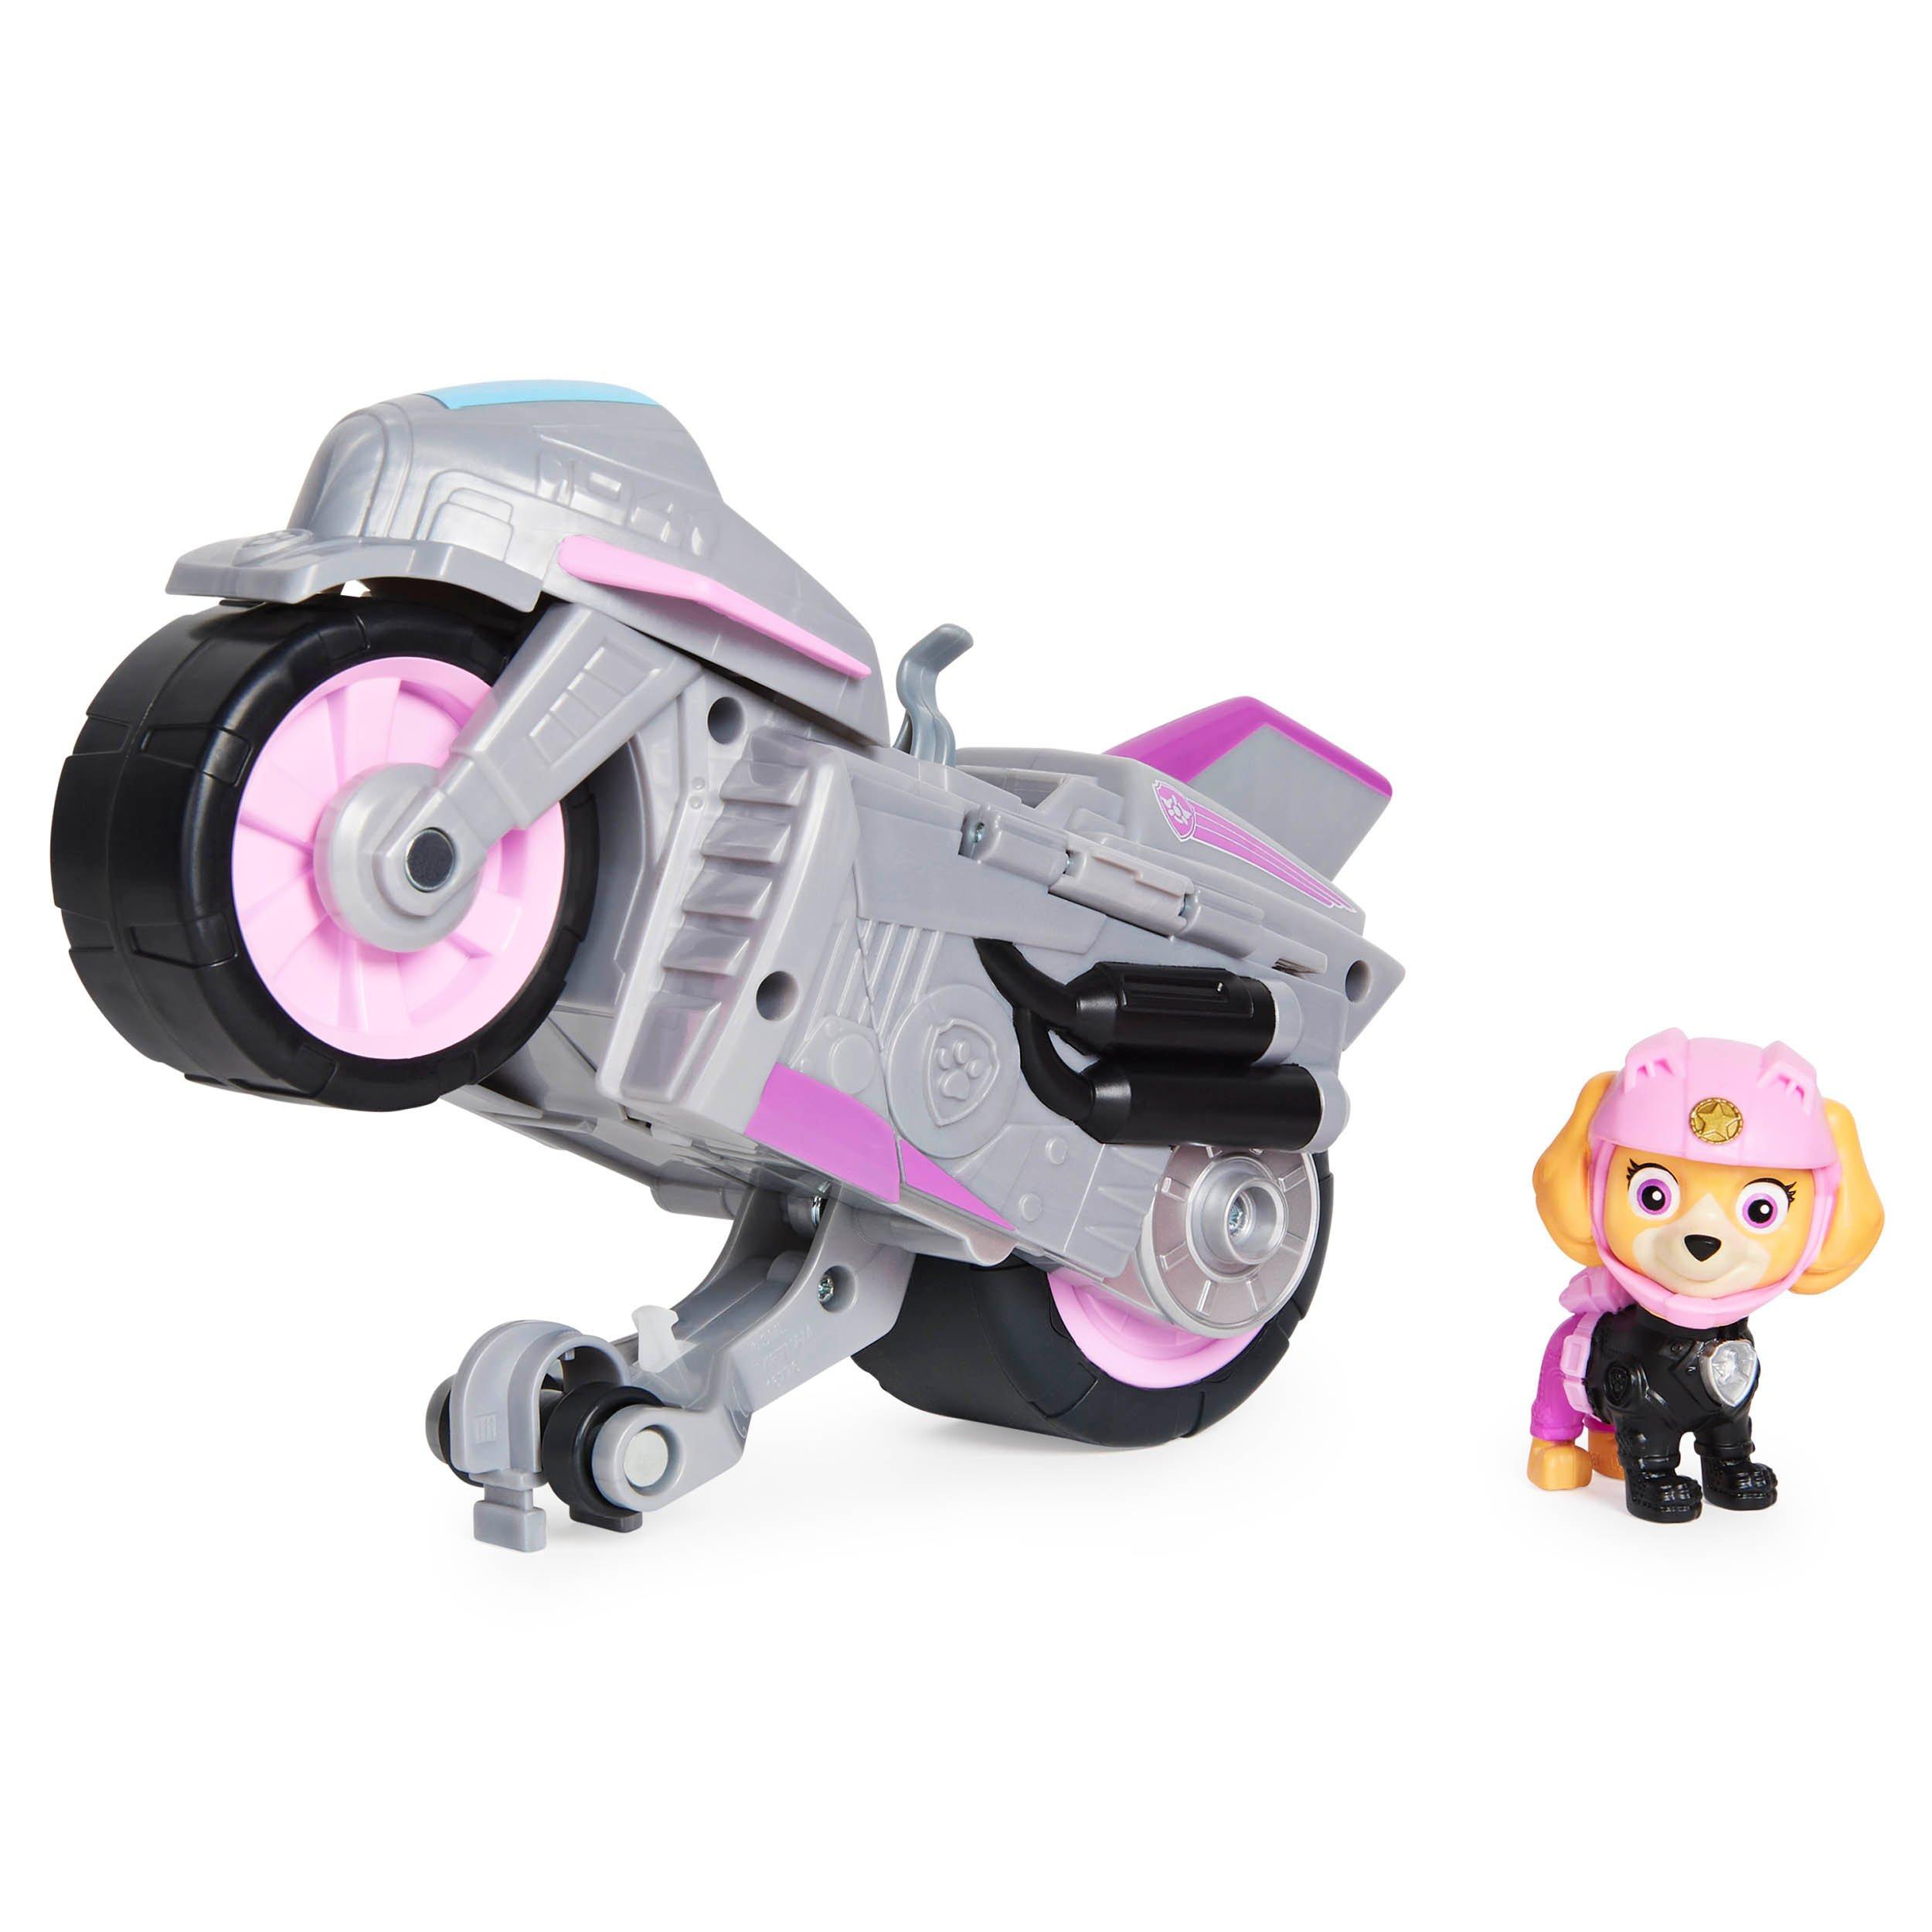 PAW Patrol Moto Deluxe Pull Back Motorcycle Vehicle with Wheelie Feature and Toy Set | GameStop